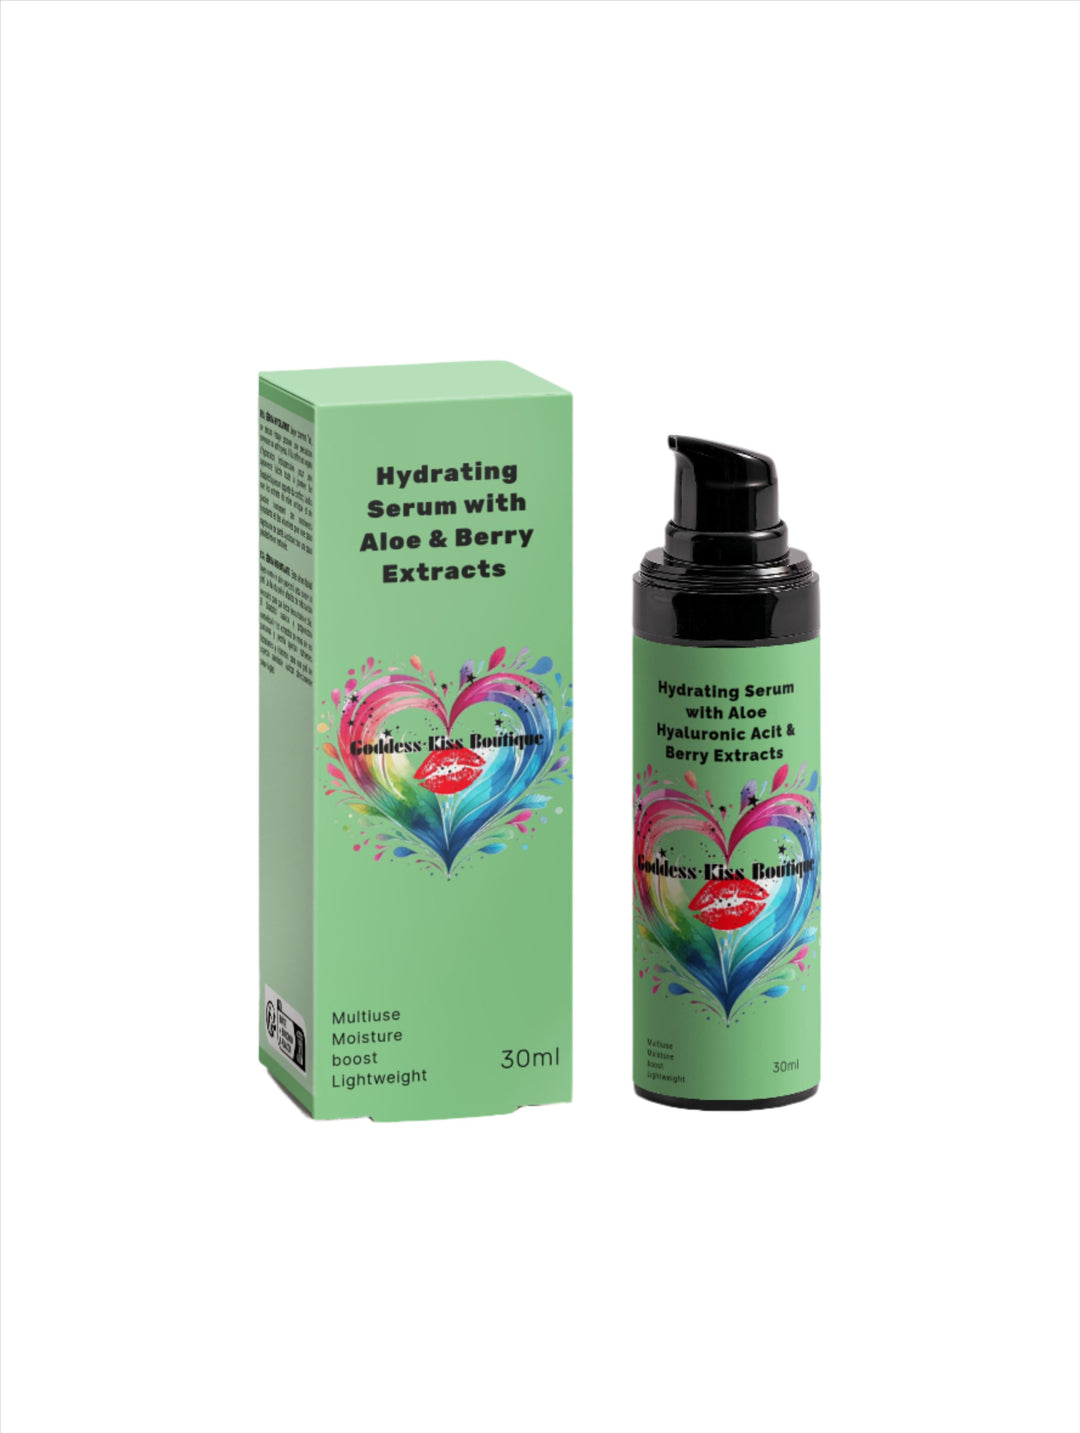 Hydrating Serum with Aloe, Hyaluronic Acid & Berry Extracts - Moisture Boost Serum for Dehydrated, Dry, and Mature Skin